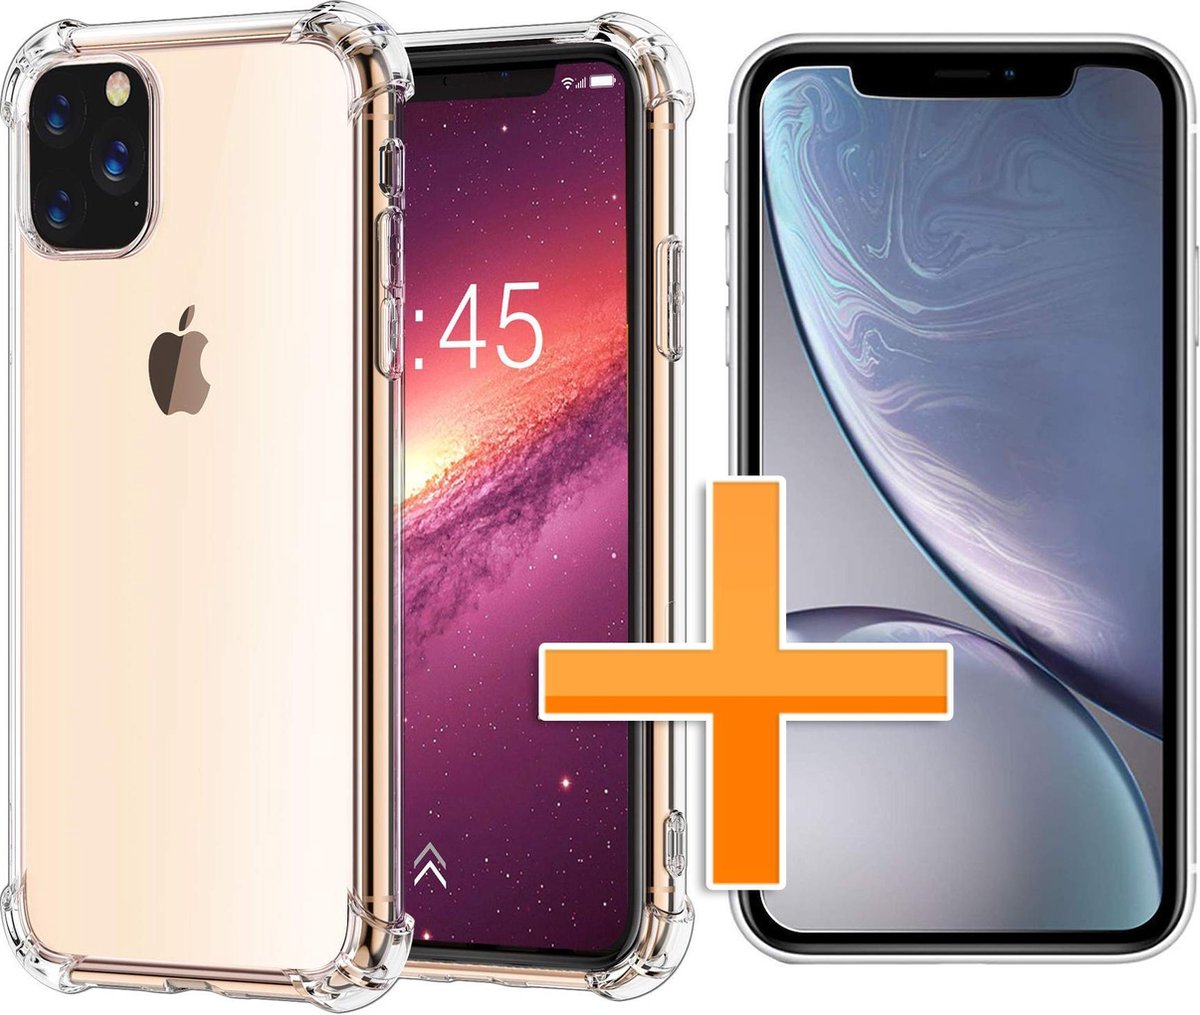 Apple iPhone 11 Pro Max Hoesje - Anti Shock Hybrid Case & Tempered Glass Combi - Transparant